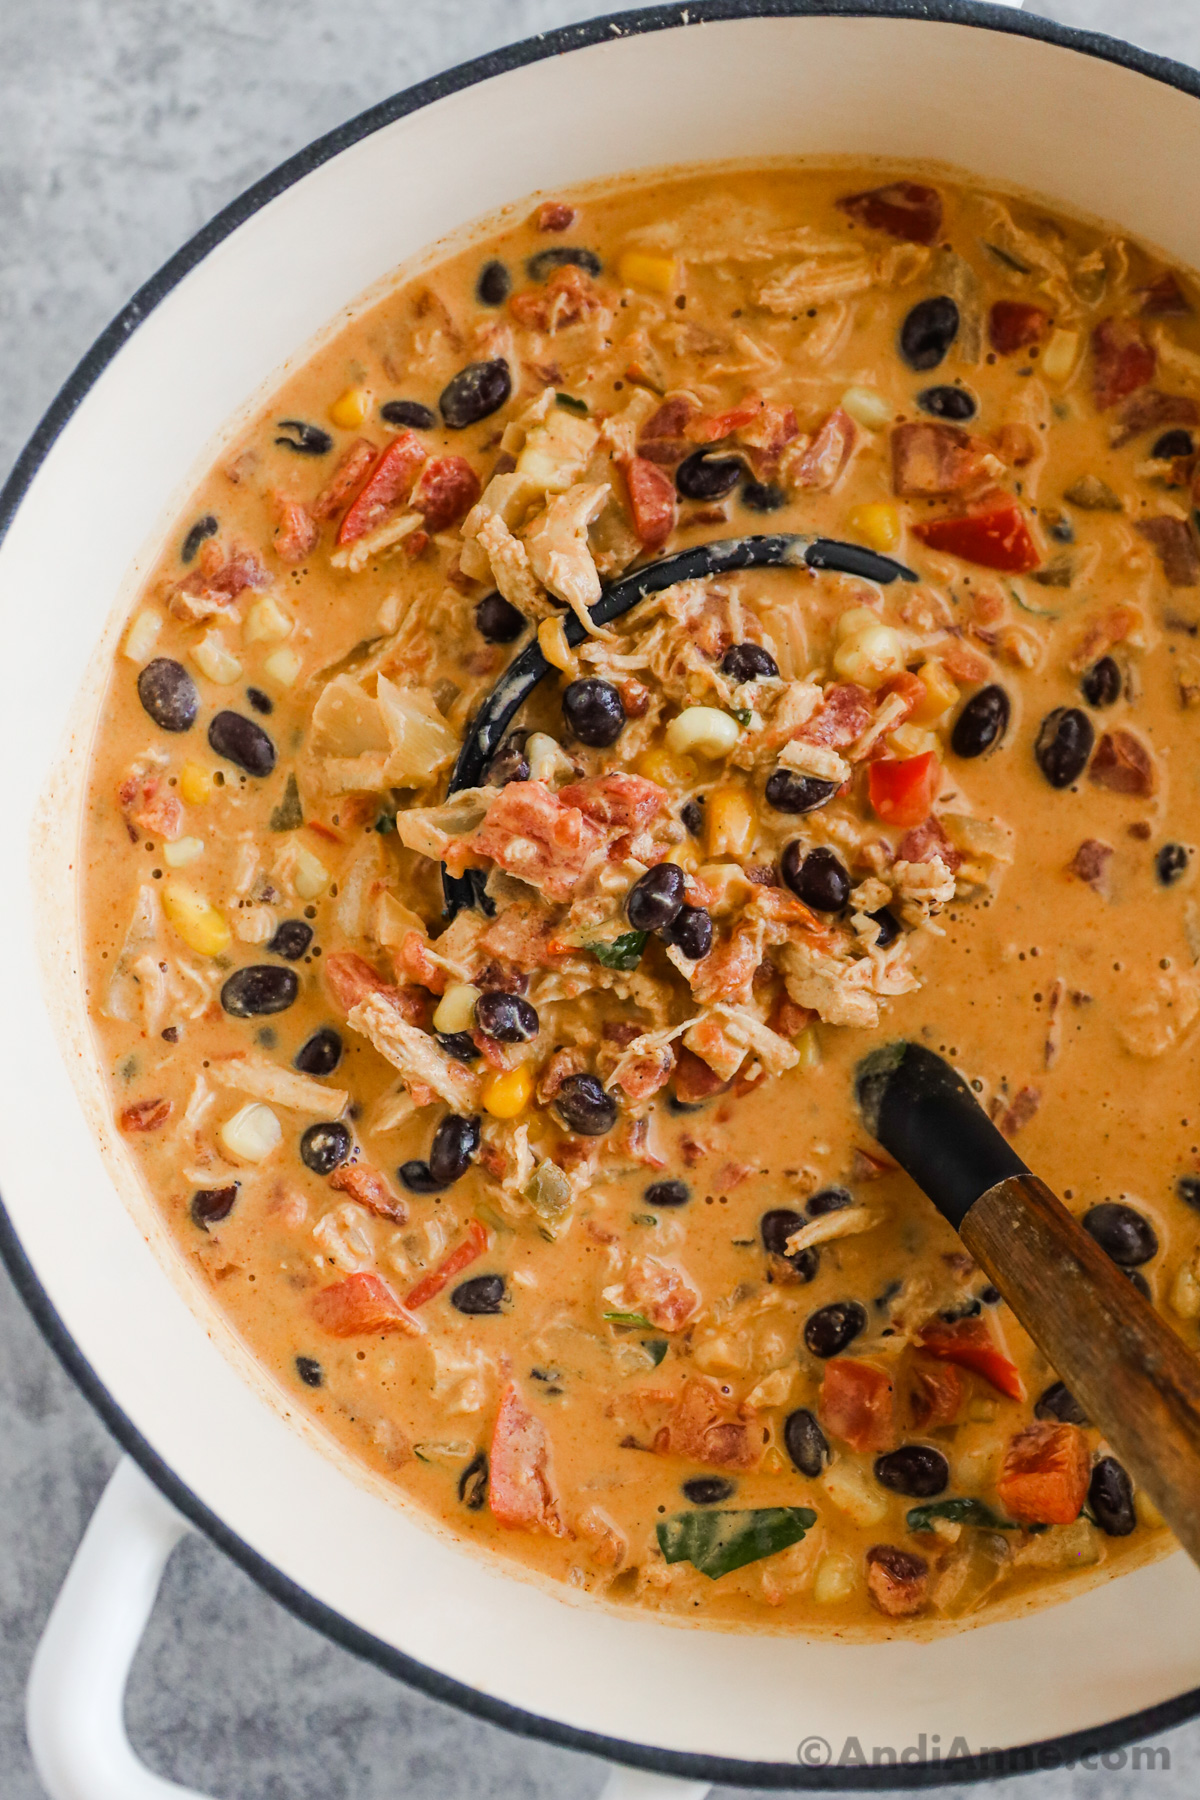 Close up of shredded chicken, black beans, corn, tomatoes and other ingredients in a creamy broth in a soup pot.